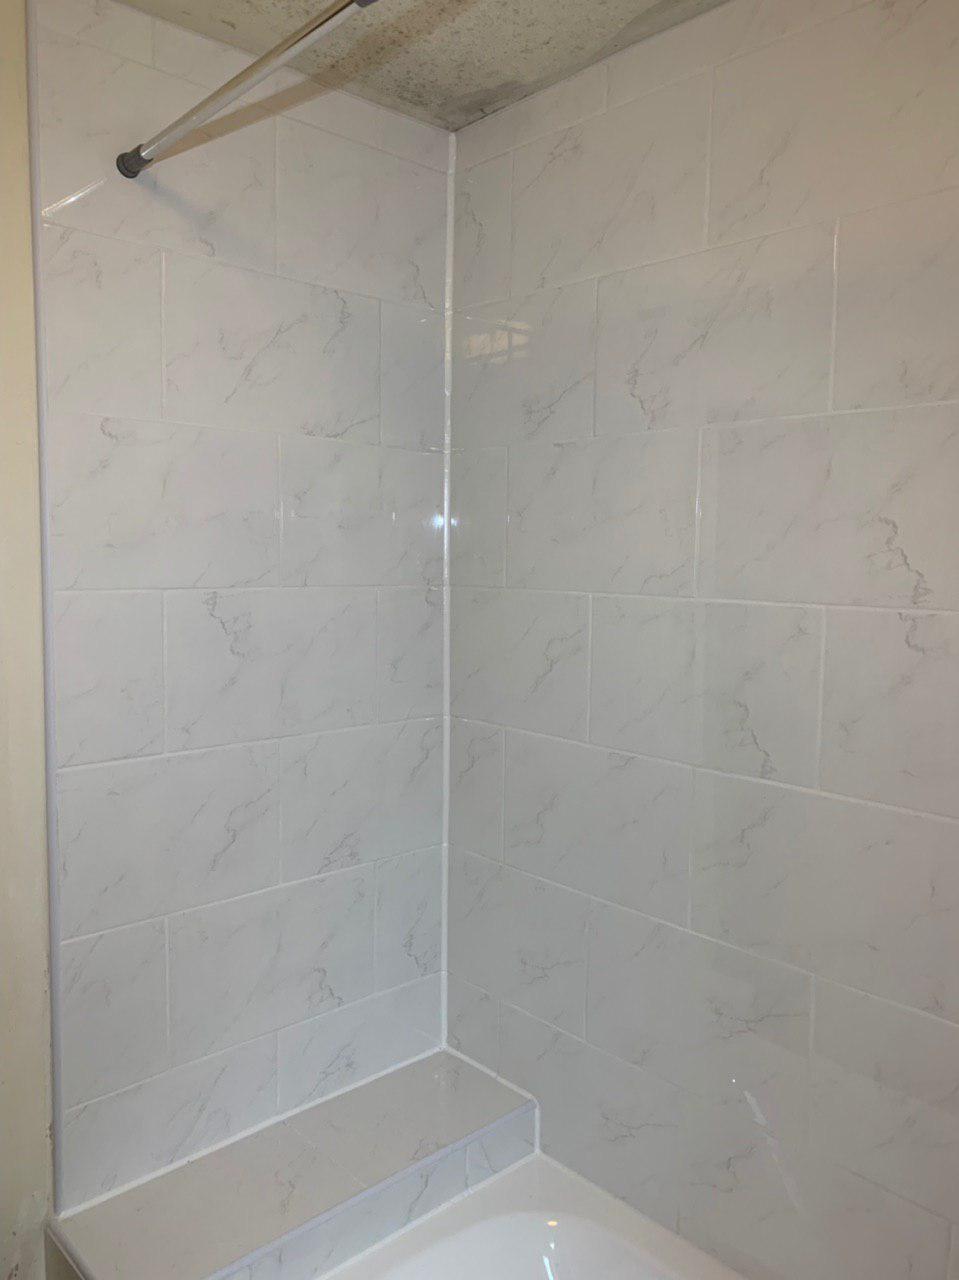 Small bathroom refurbishment for a landlords rental property completed in 3 days 7